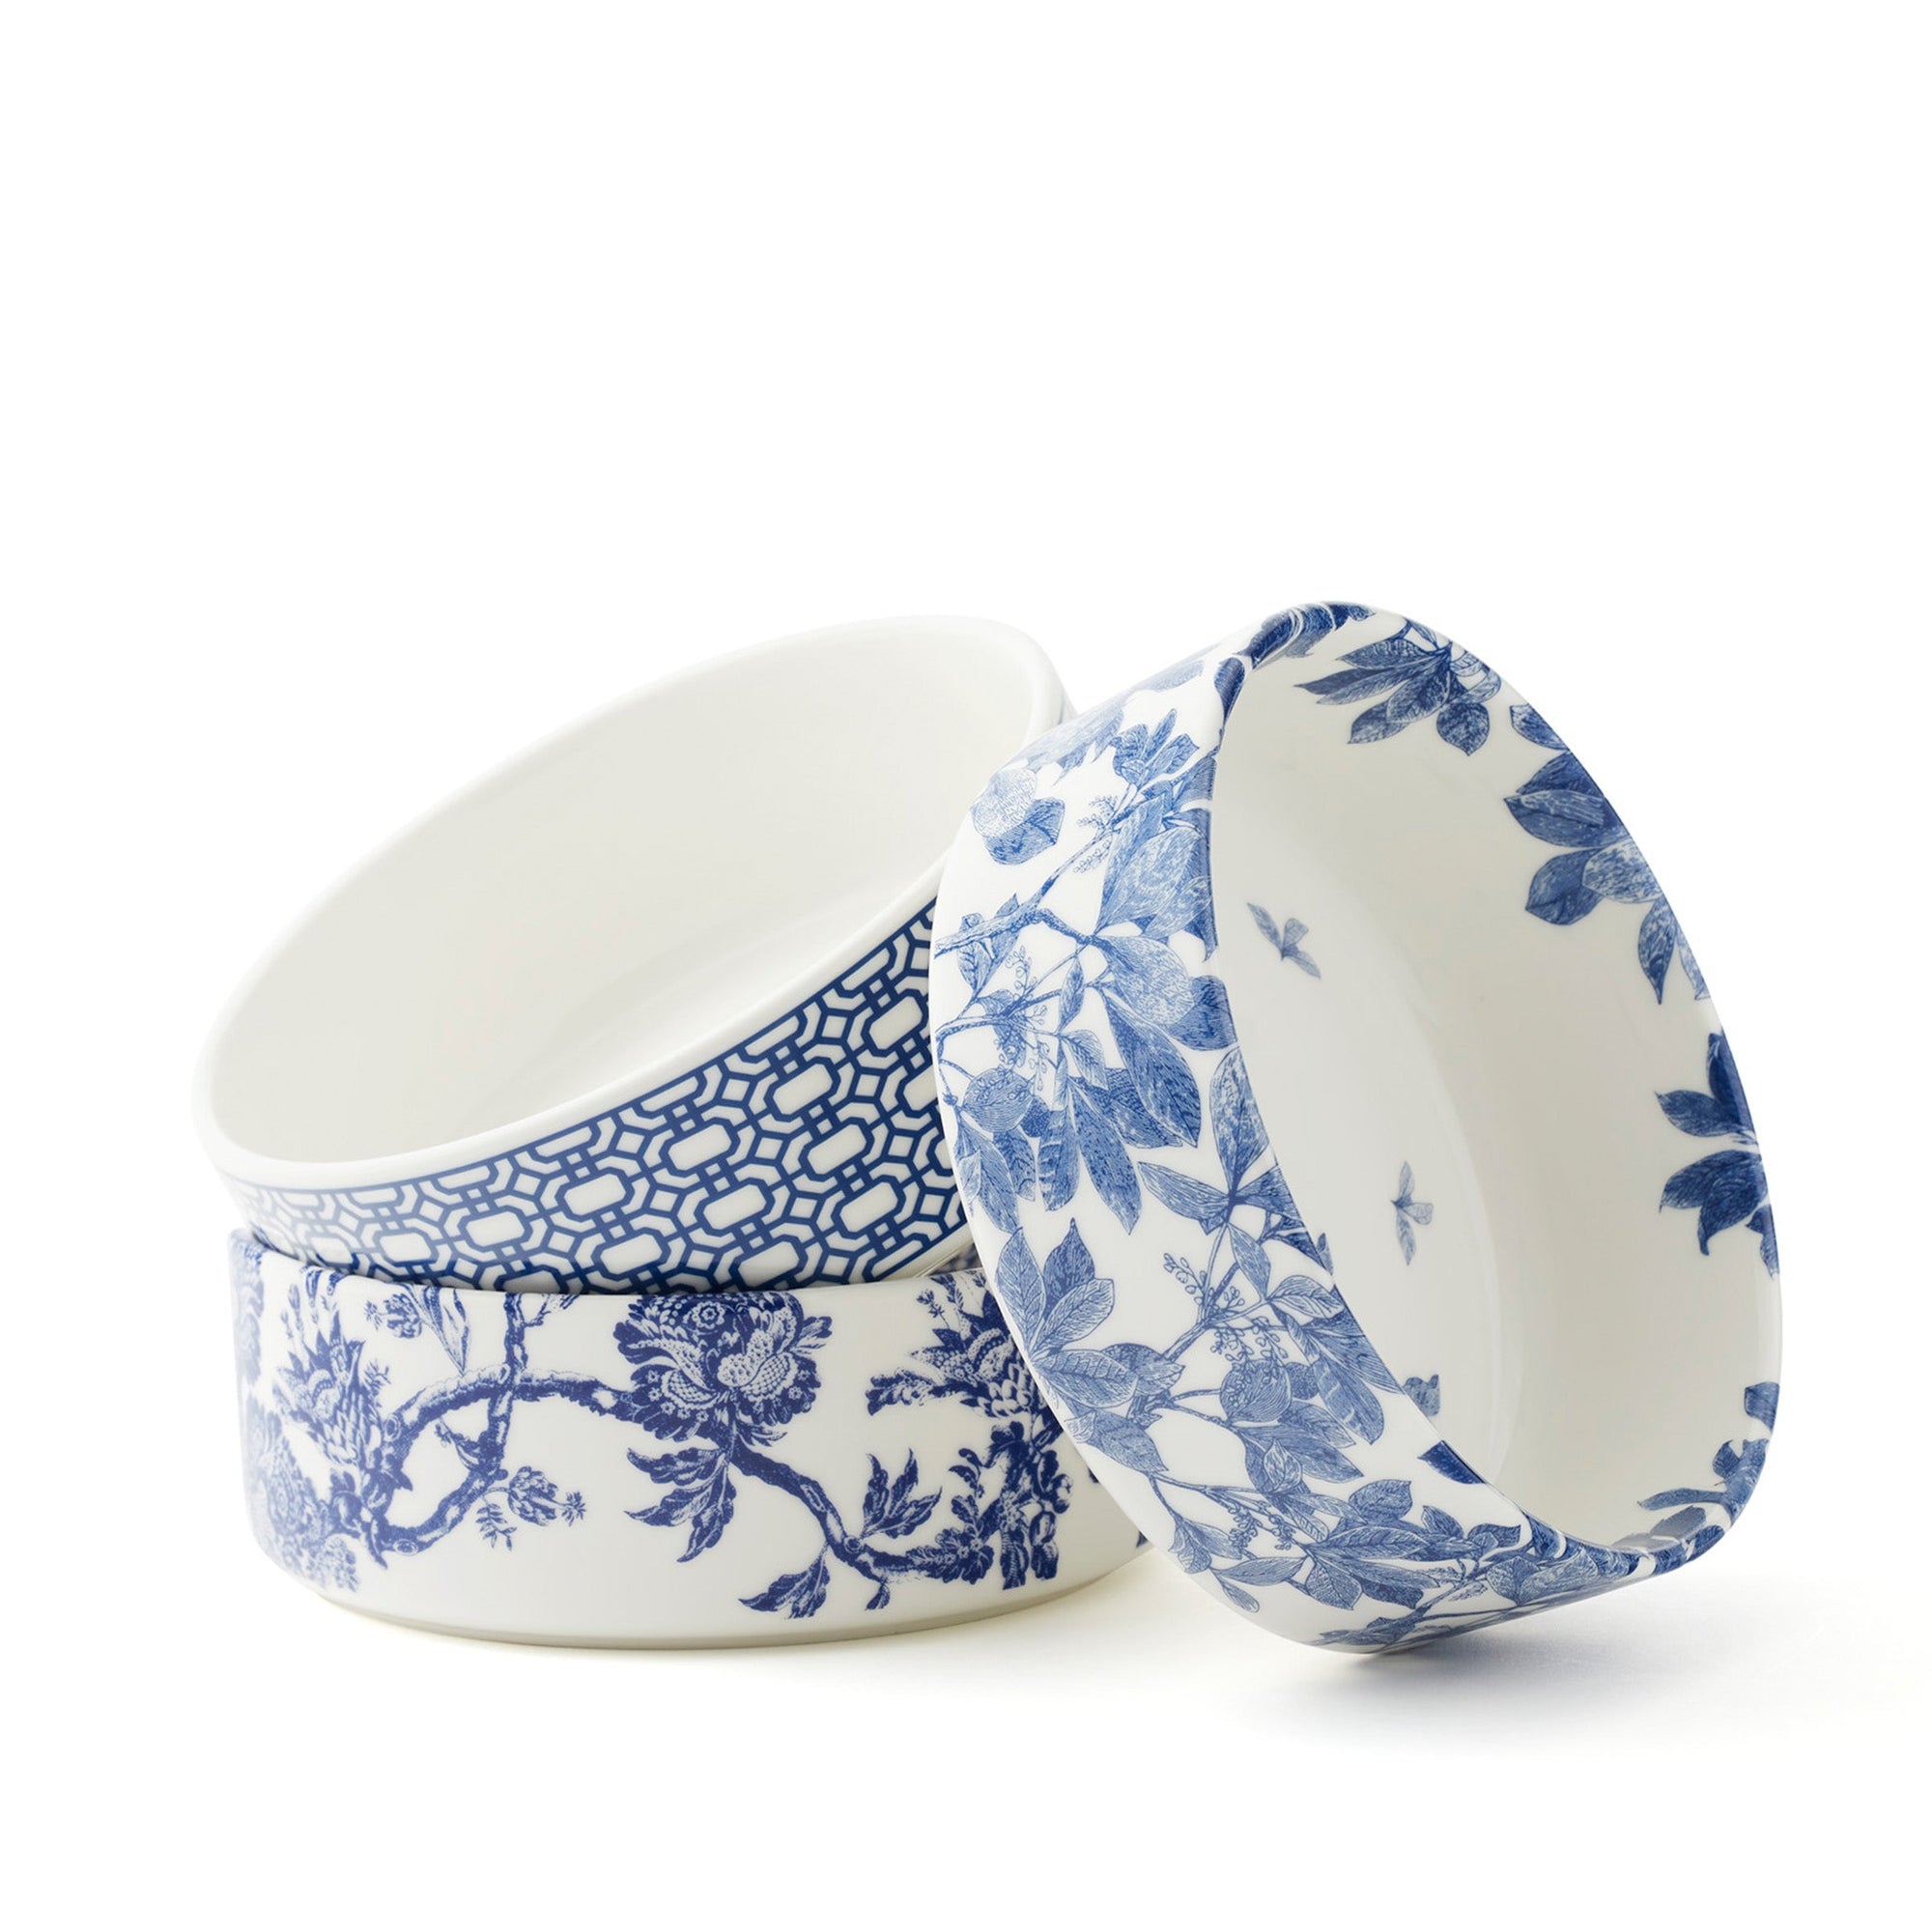 Arcadia Large Porcelain Pet Bowl in Blue and White